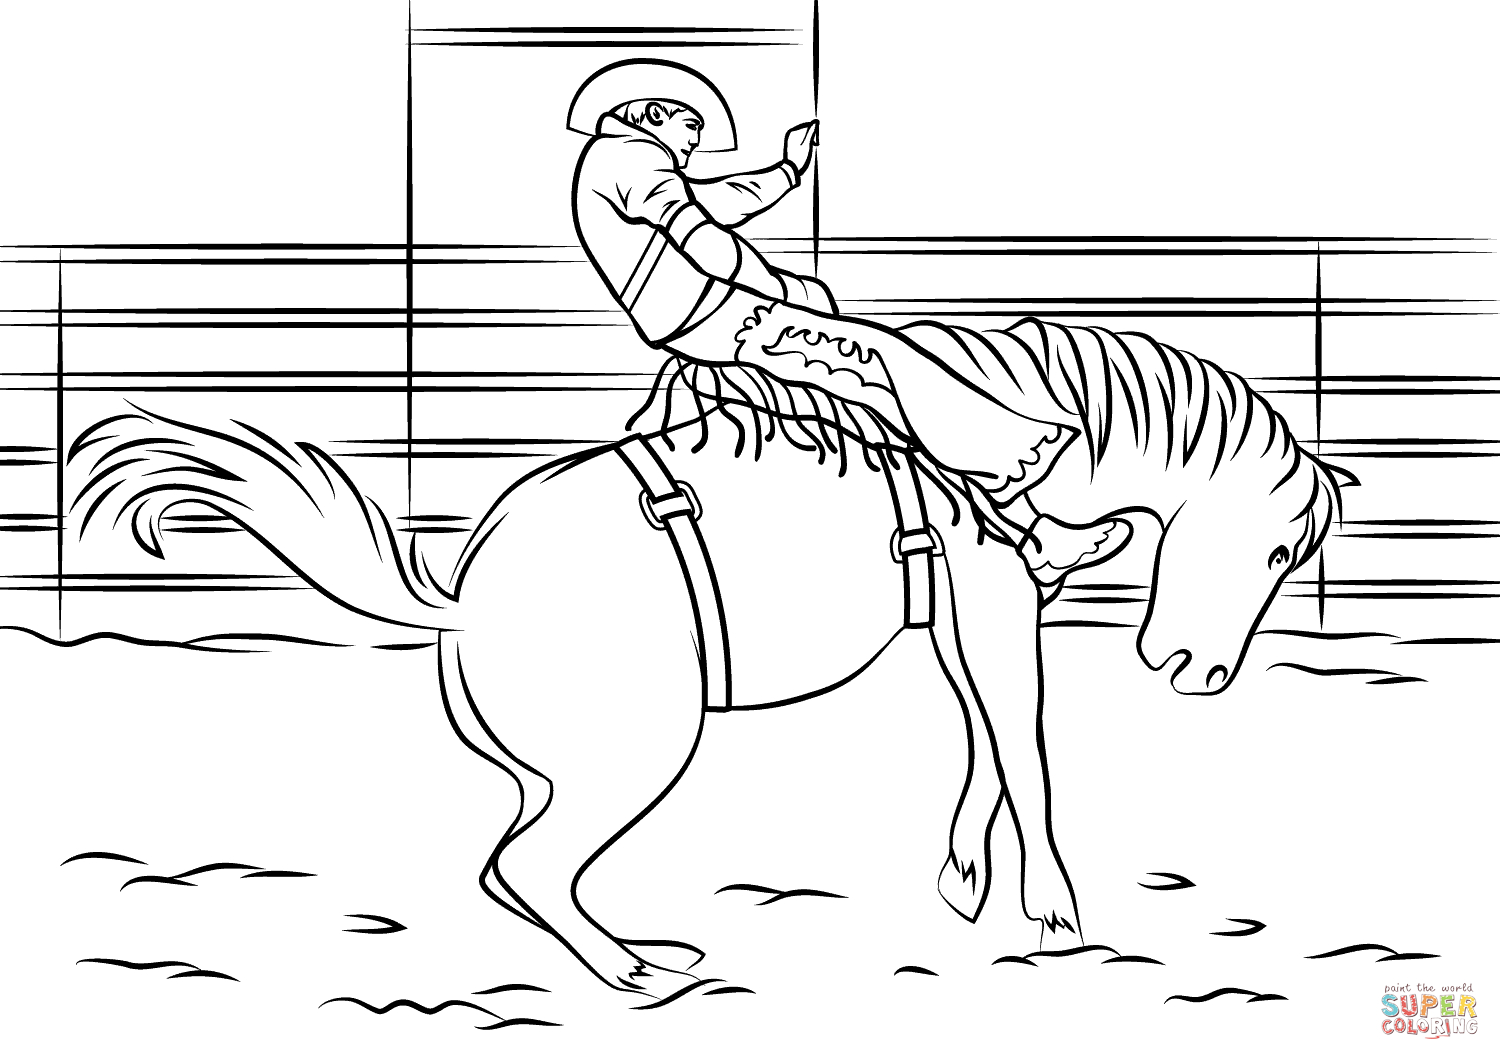 Bull Riding Coloring Pages Saddle Bronc Rodeo Coloring Page Free Printable Coloring Pages